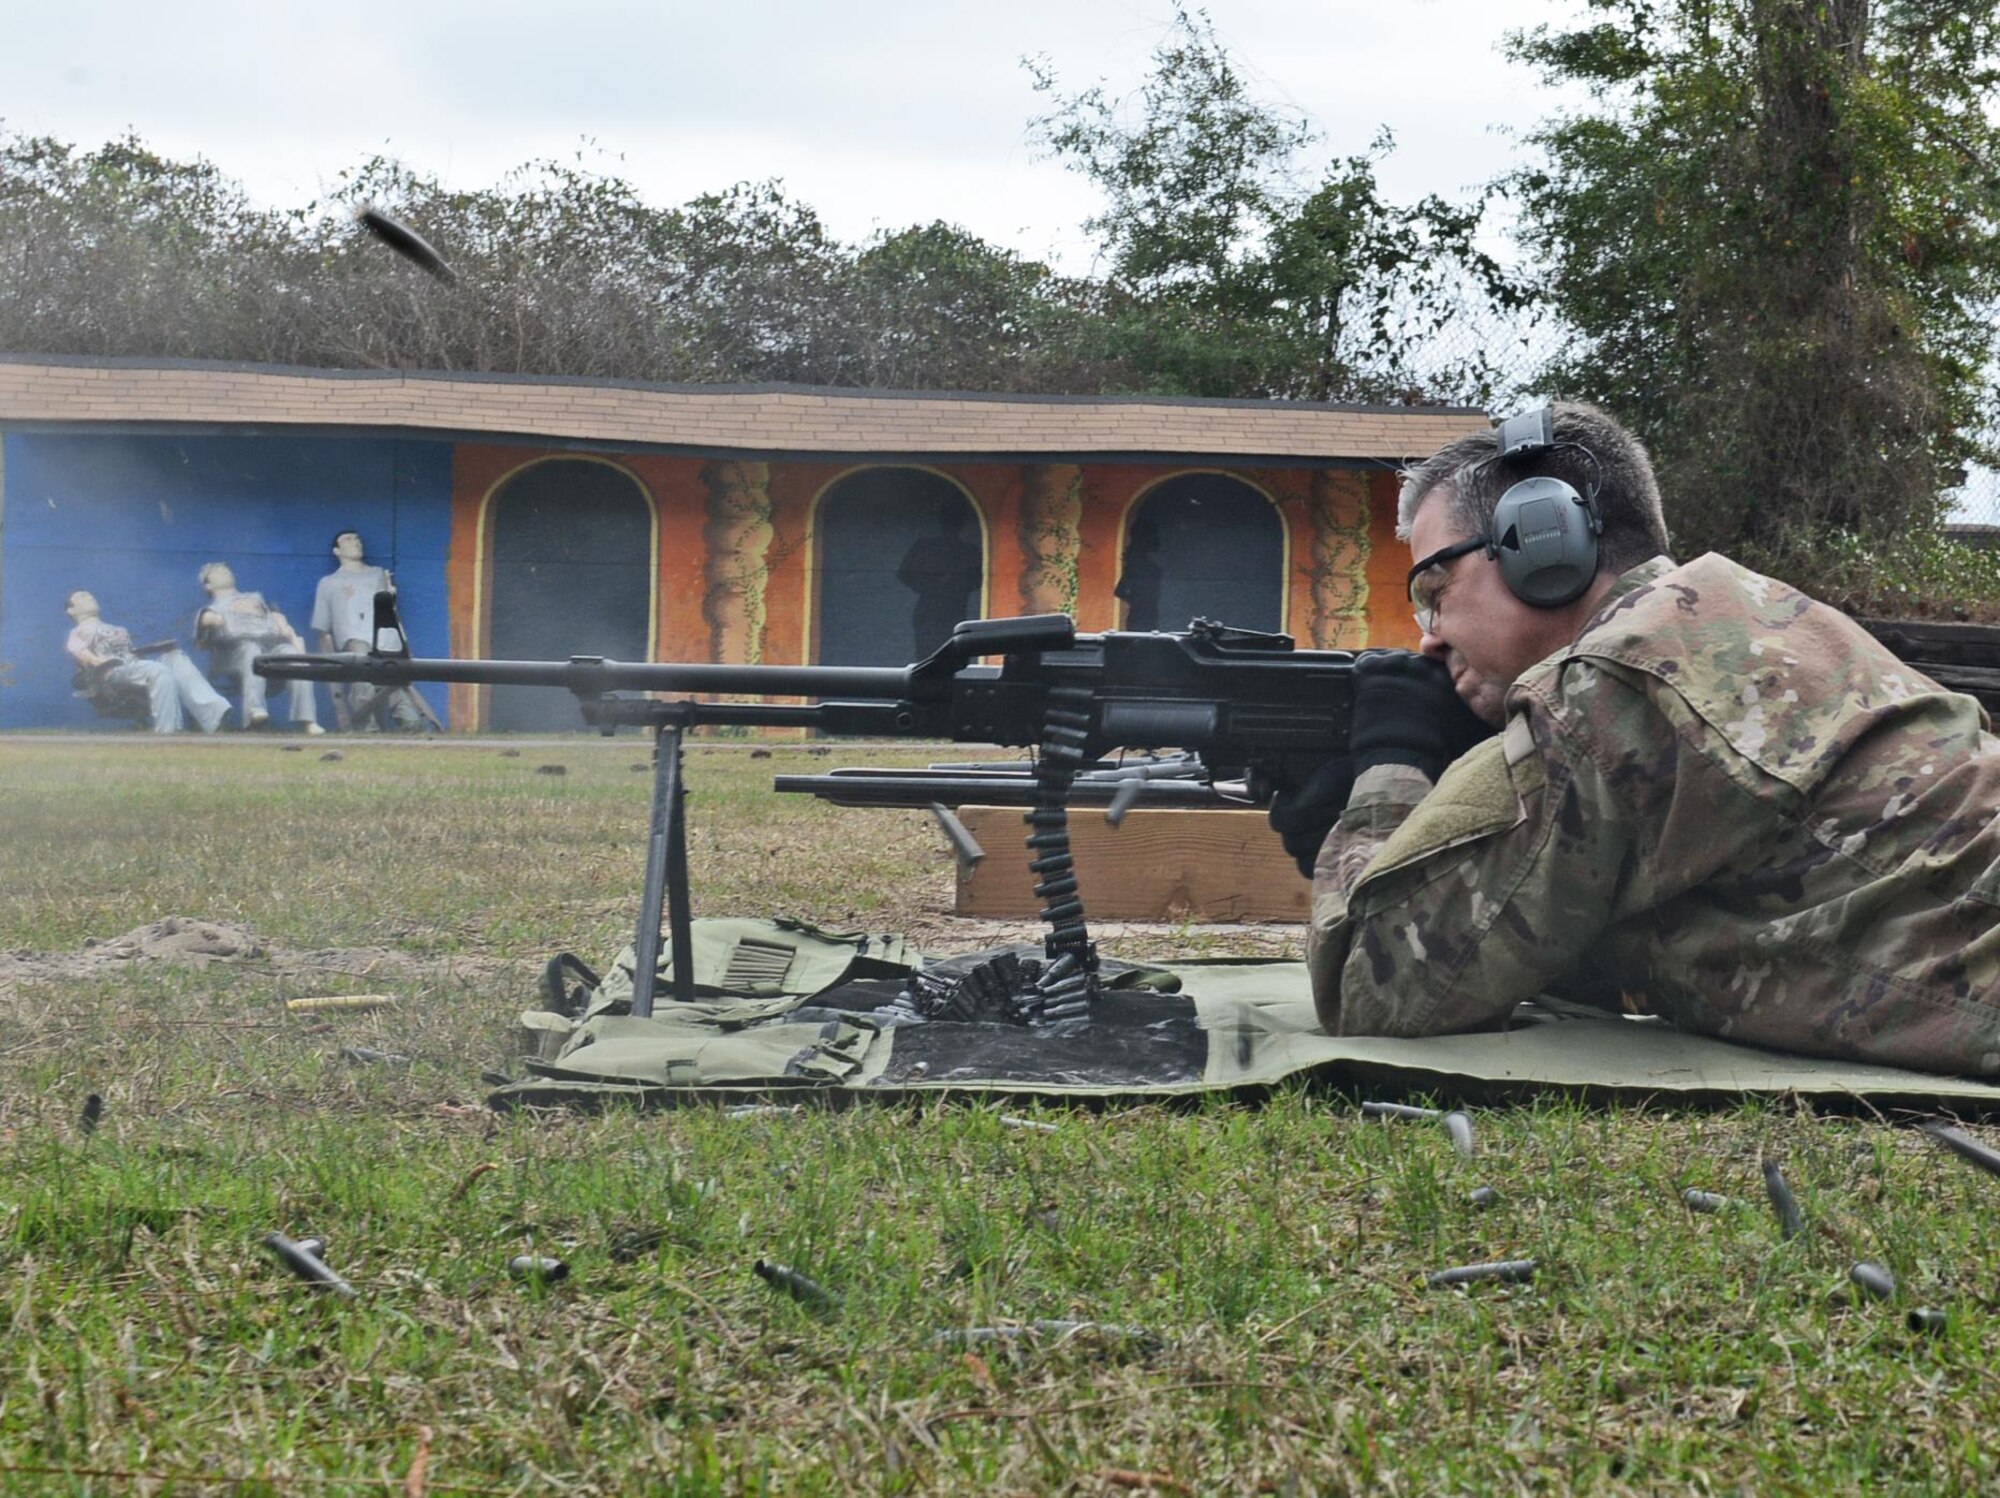 A casing flies from a Russian PKM Machine Gun as Capt. Daniel Jasper, United States Air Force Special Operations School course director, fires at a target on Hurlburt Field, Fla., Feb. 15, 2017. Jasper demonstrated the weapon’s capability to about 15 people going through the Special Operations Command Civilian Development program. (U.S. Air Force photo/Staff Sgt. Melanie Holochwost)